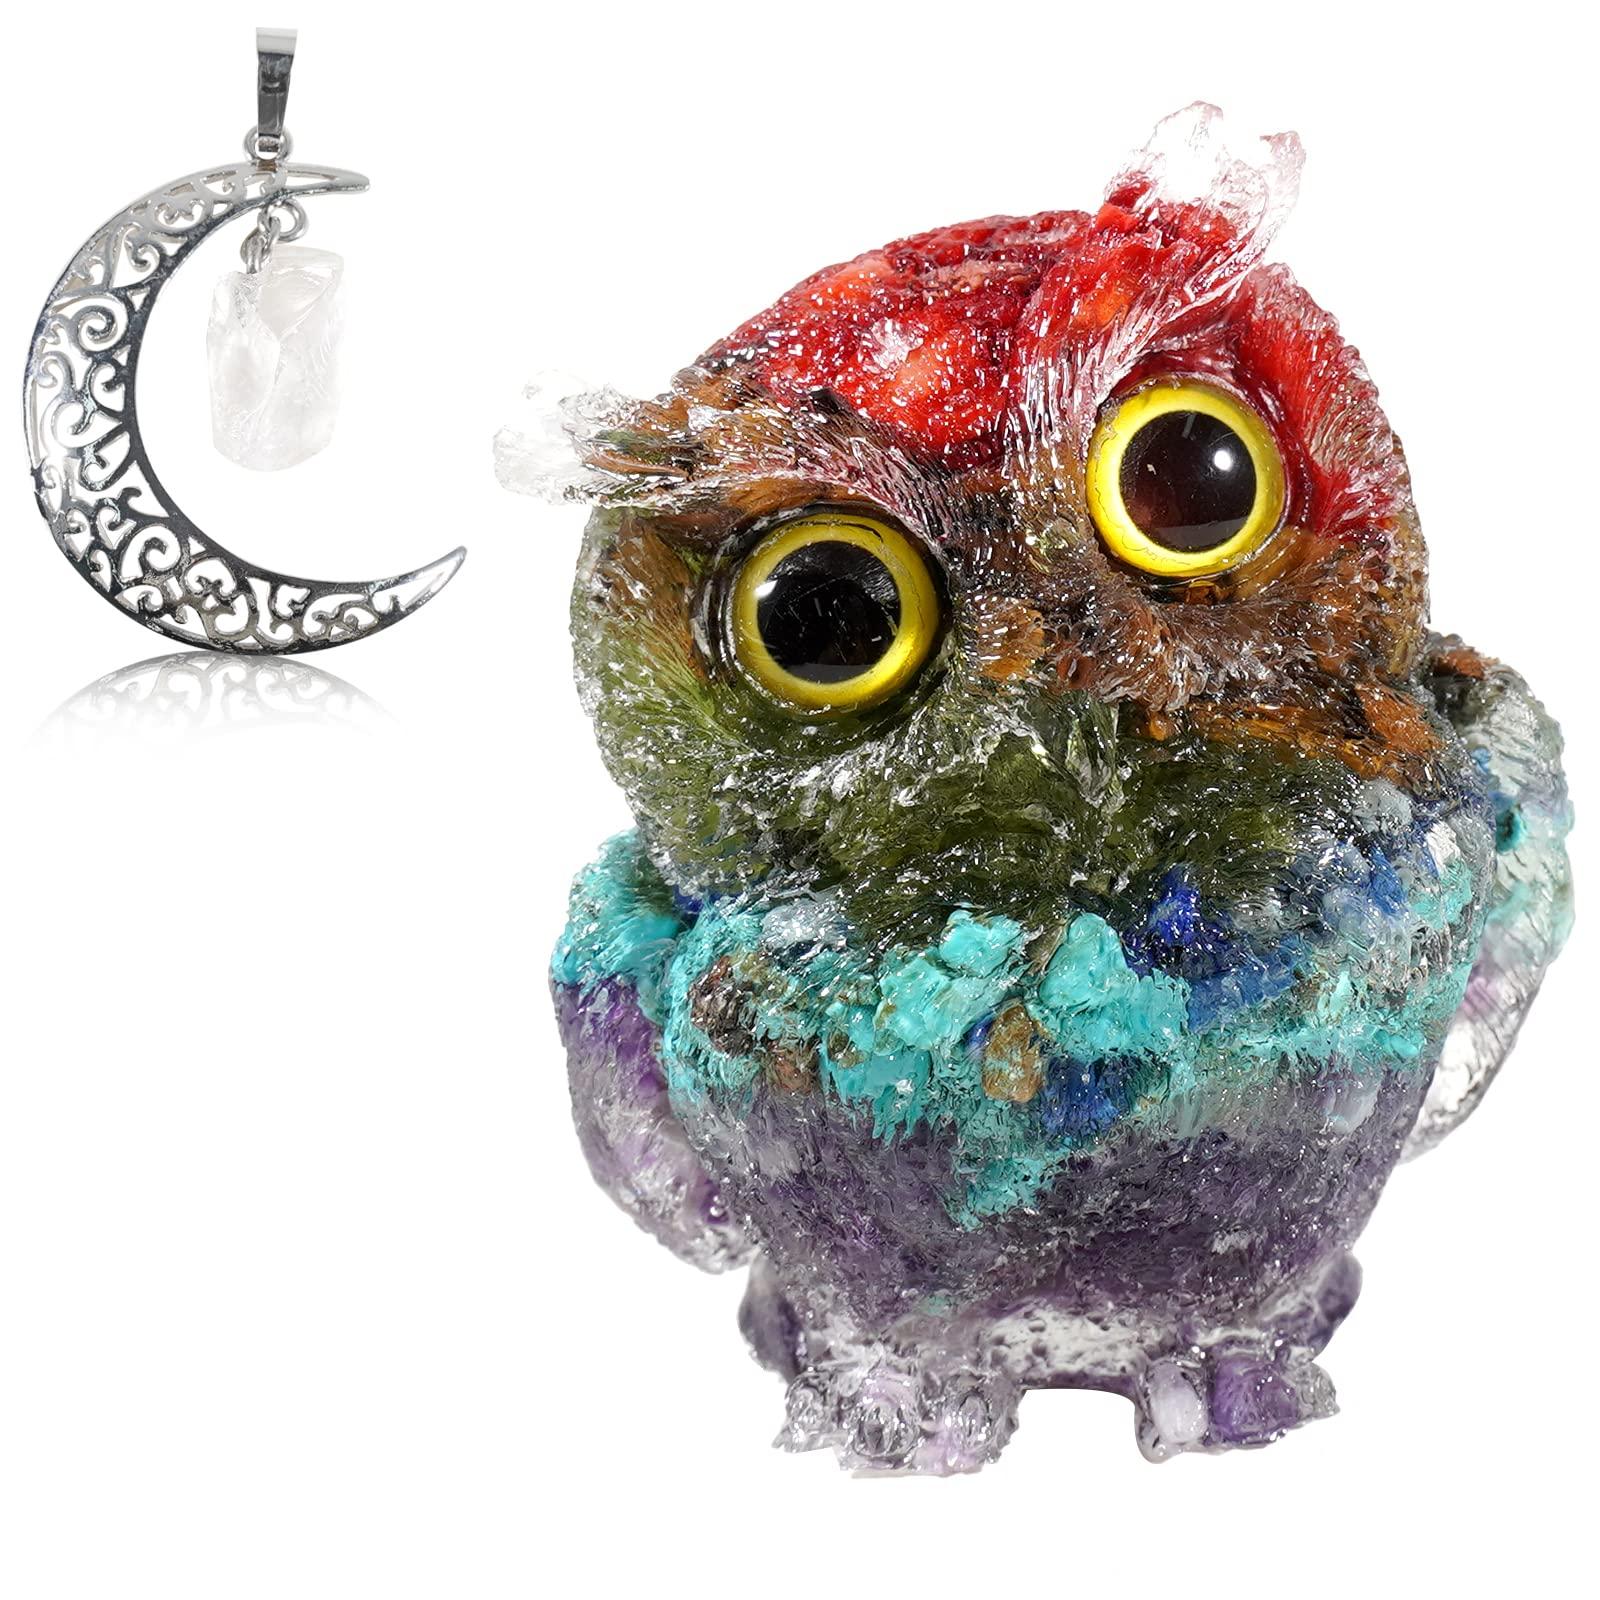 Soulnioi Gemstone Moon Necklace Antique Silver Plated Crystal Necklace Pendant (Rose Quartz) , Crystal Owl Statue Ornament Resin Chip Stones Figurine for Home Office Decor(Colored)